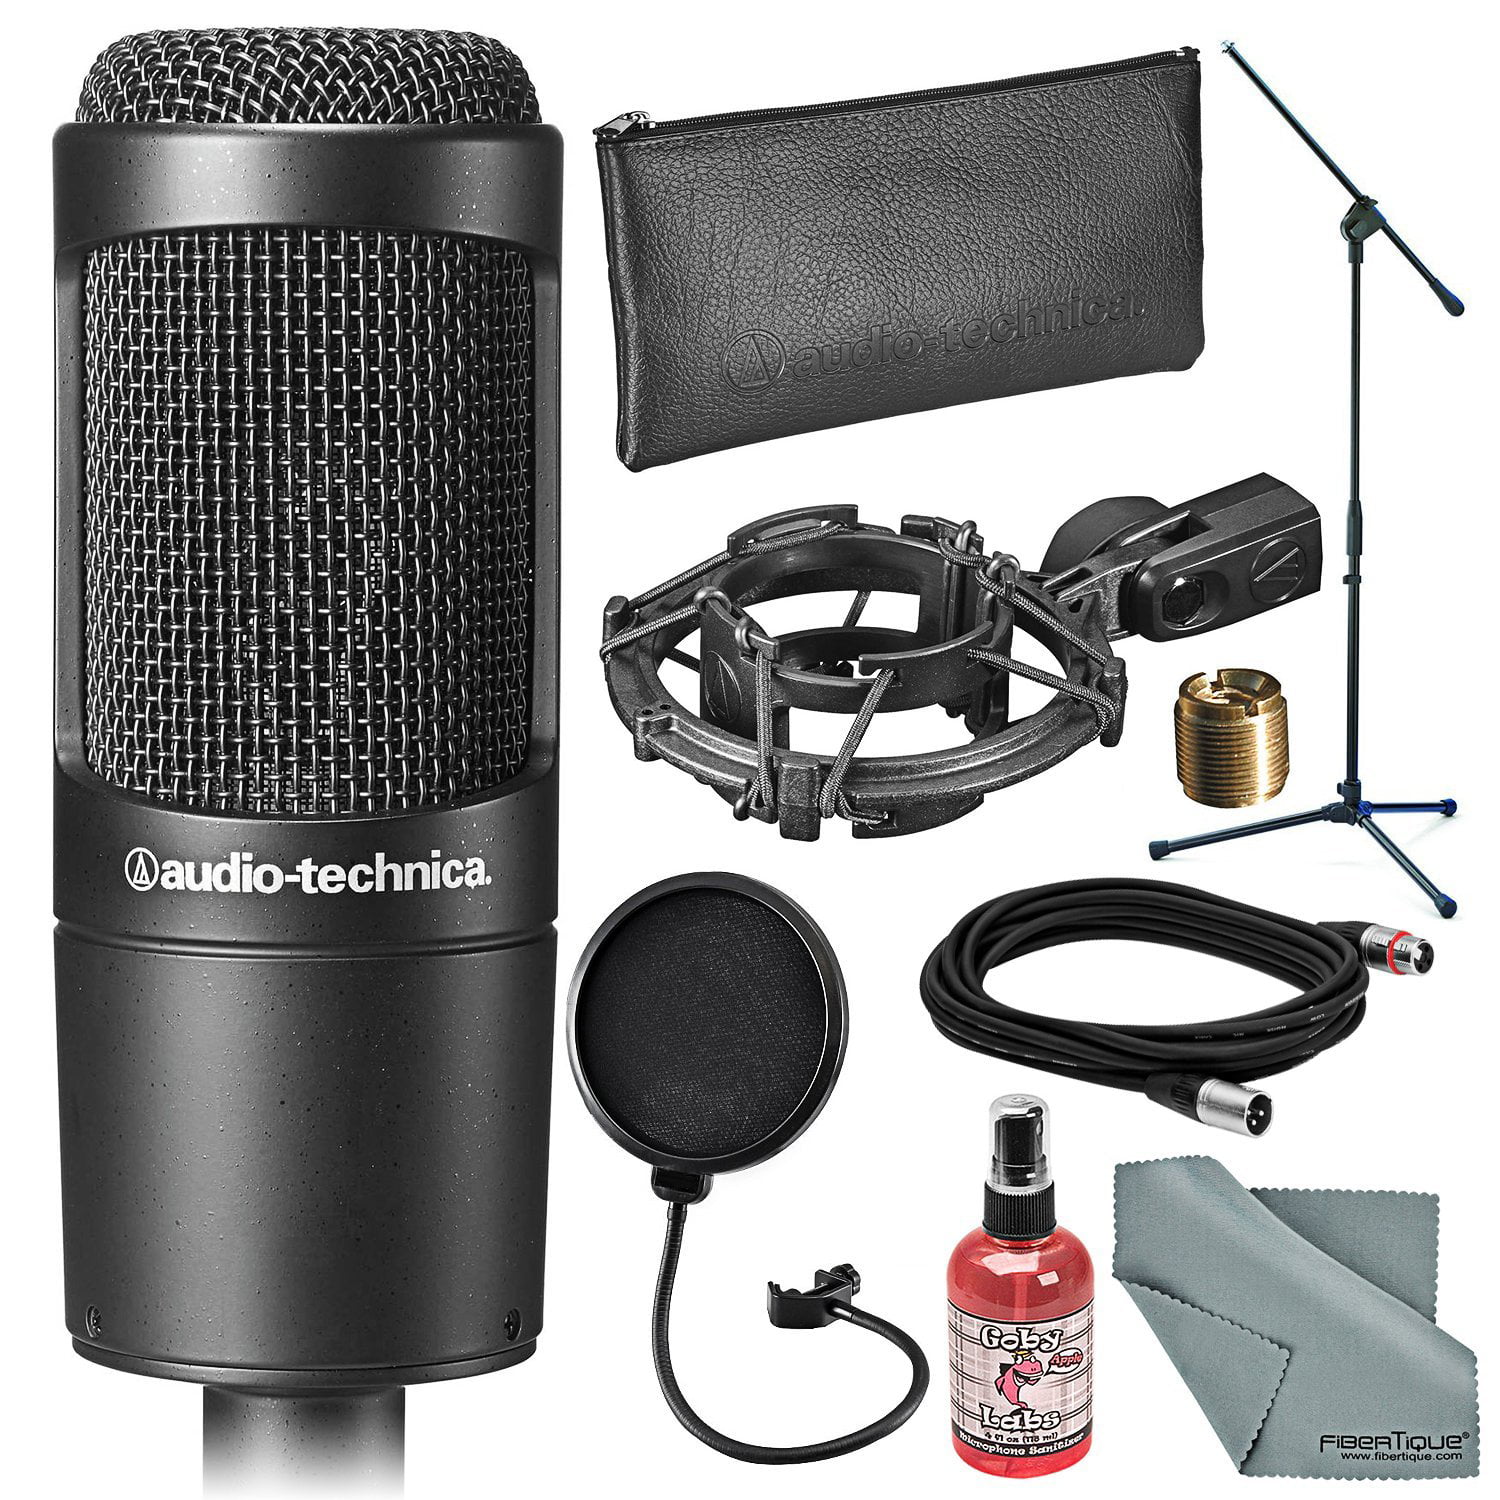 XLR Cable Pop Filter Audio-Technica AT2035 Cardioid Condenser Microphone Bundle with Boom Stand and Austin Bazaar Polishing Cloth 